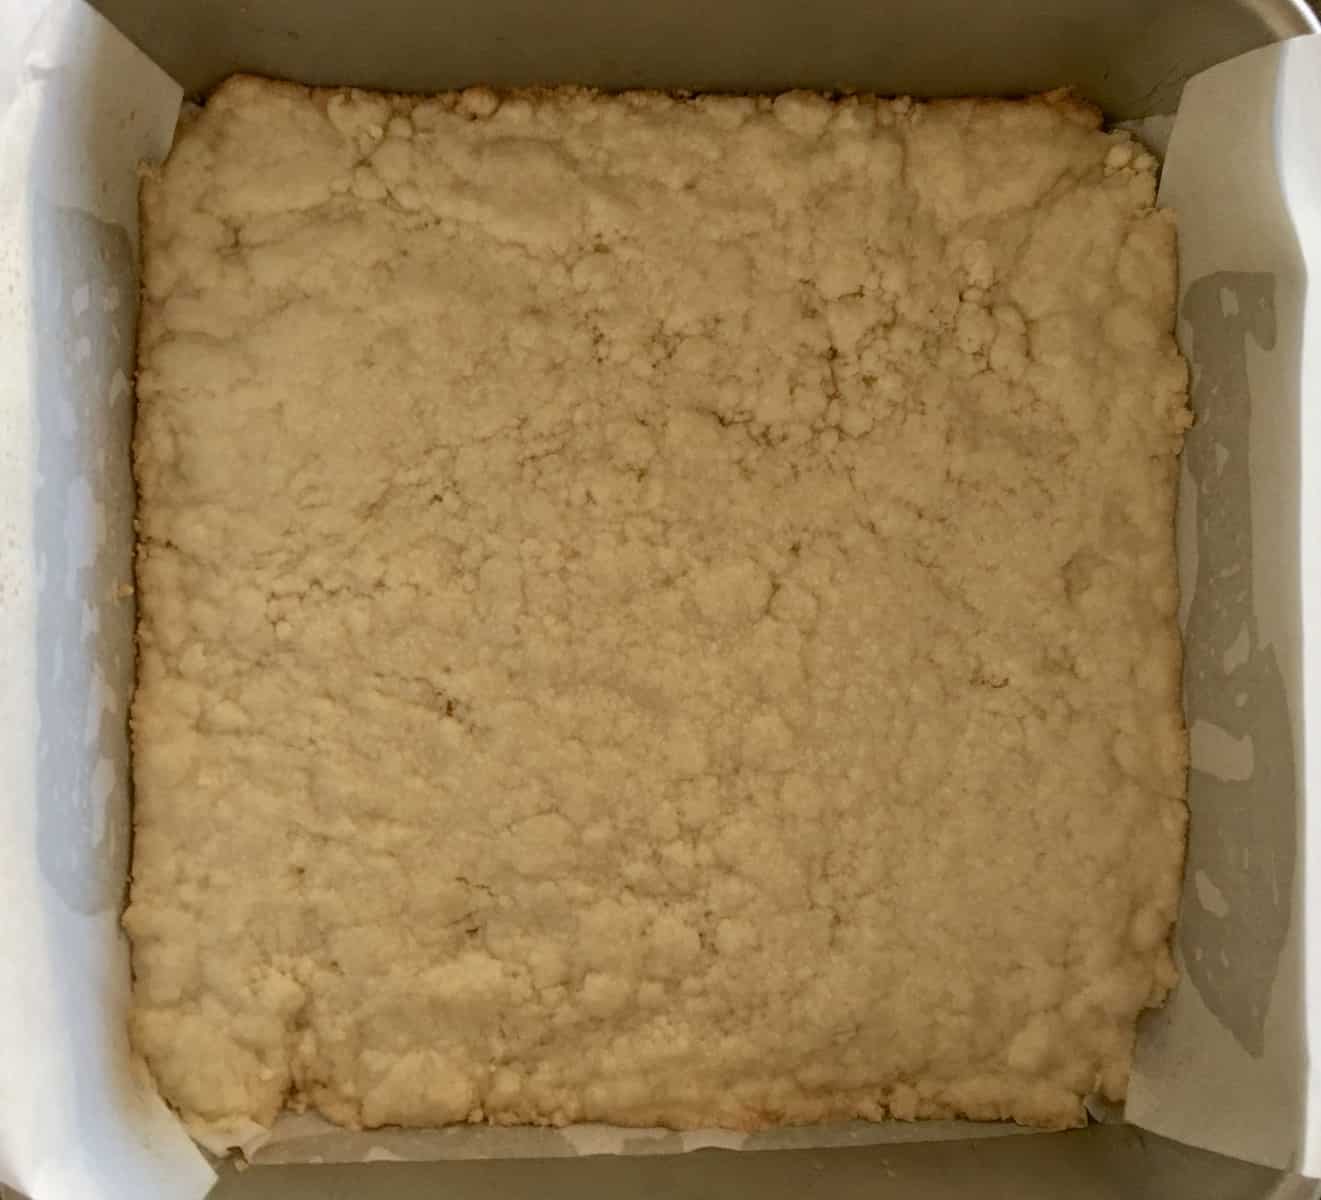 Shortbread pressed into the bottom of a greased and lined baking pan.